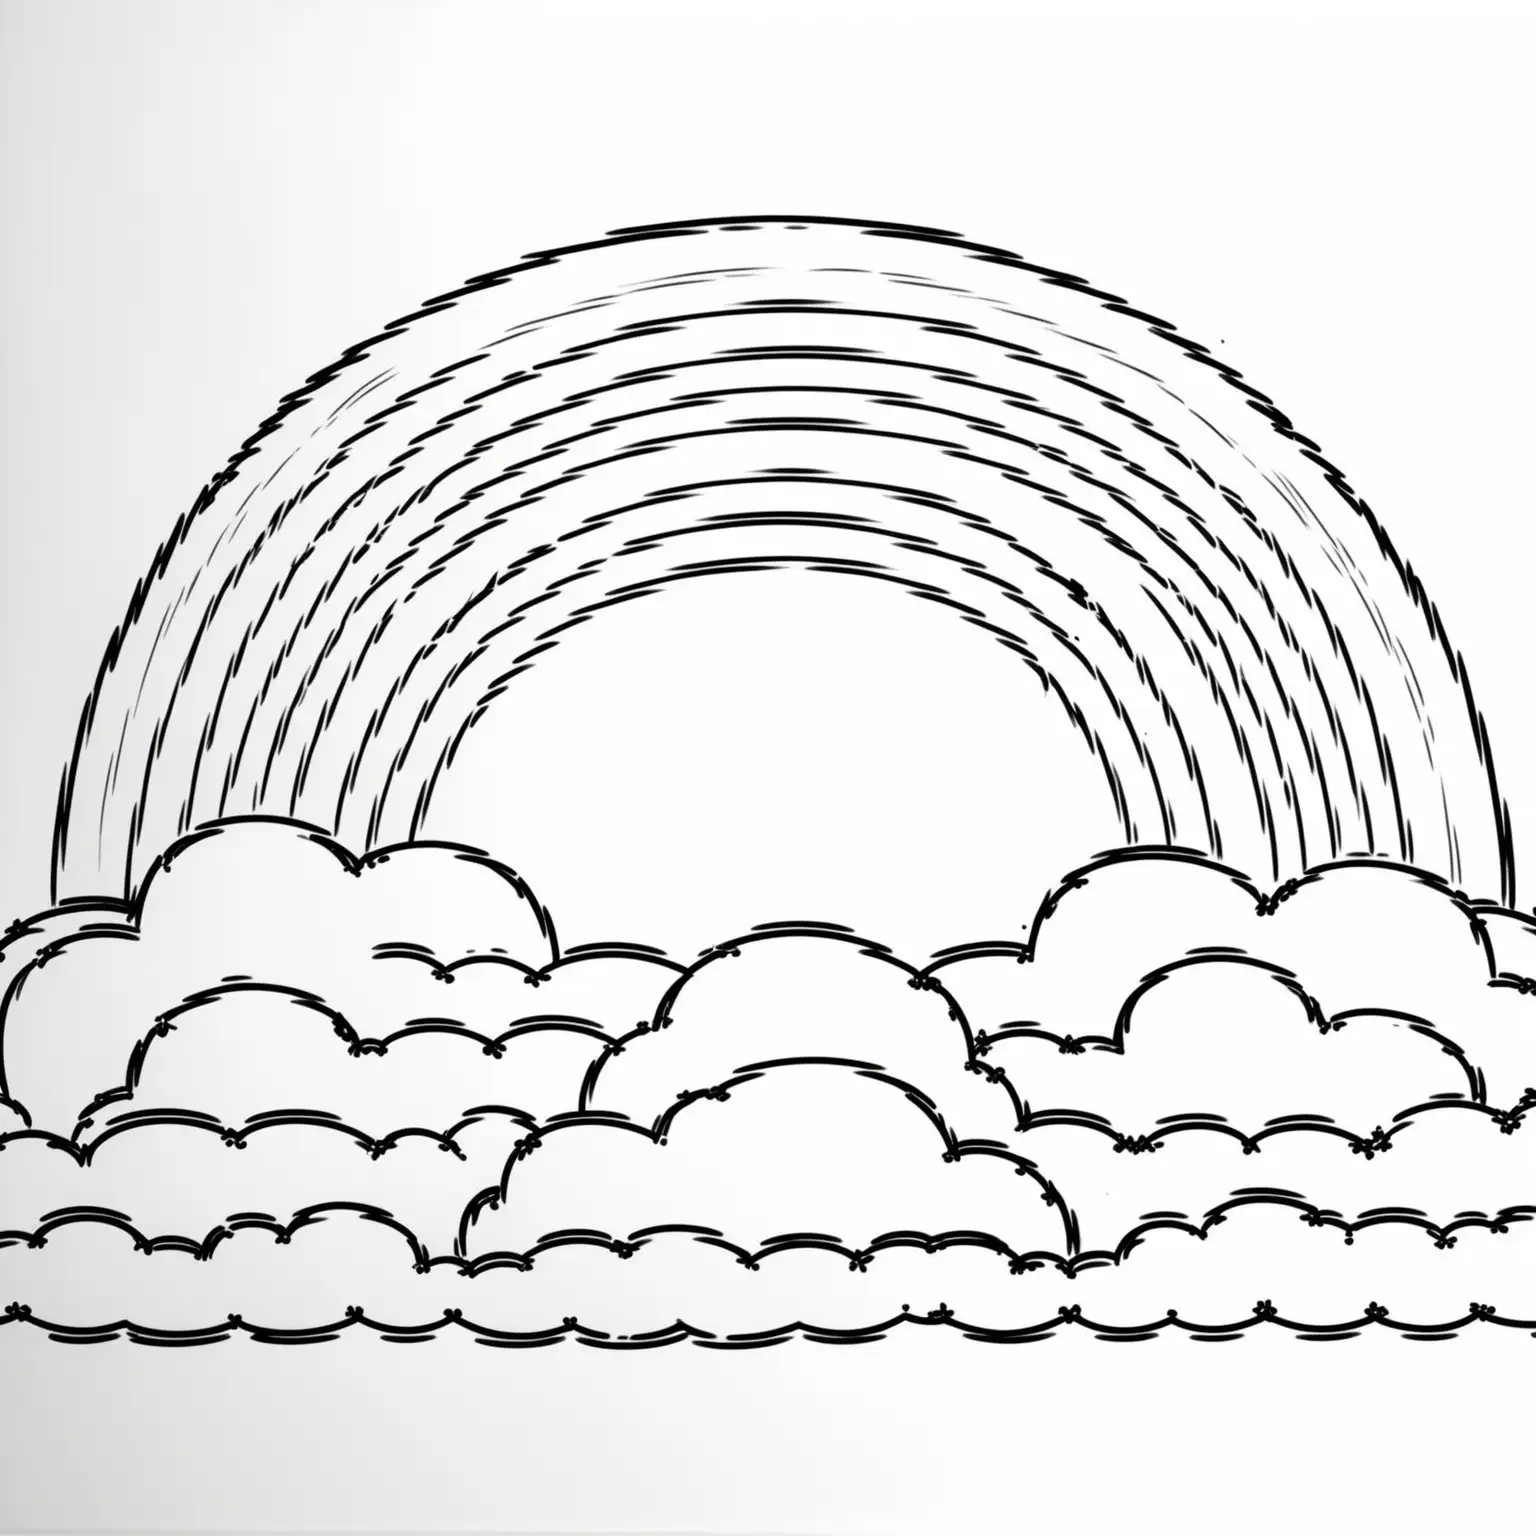 white coloring page rainbow with cloud at each end, NO COLOR